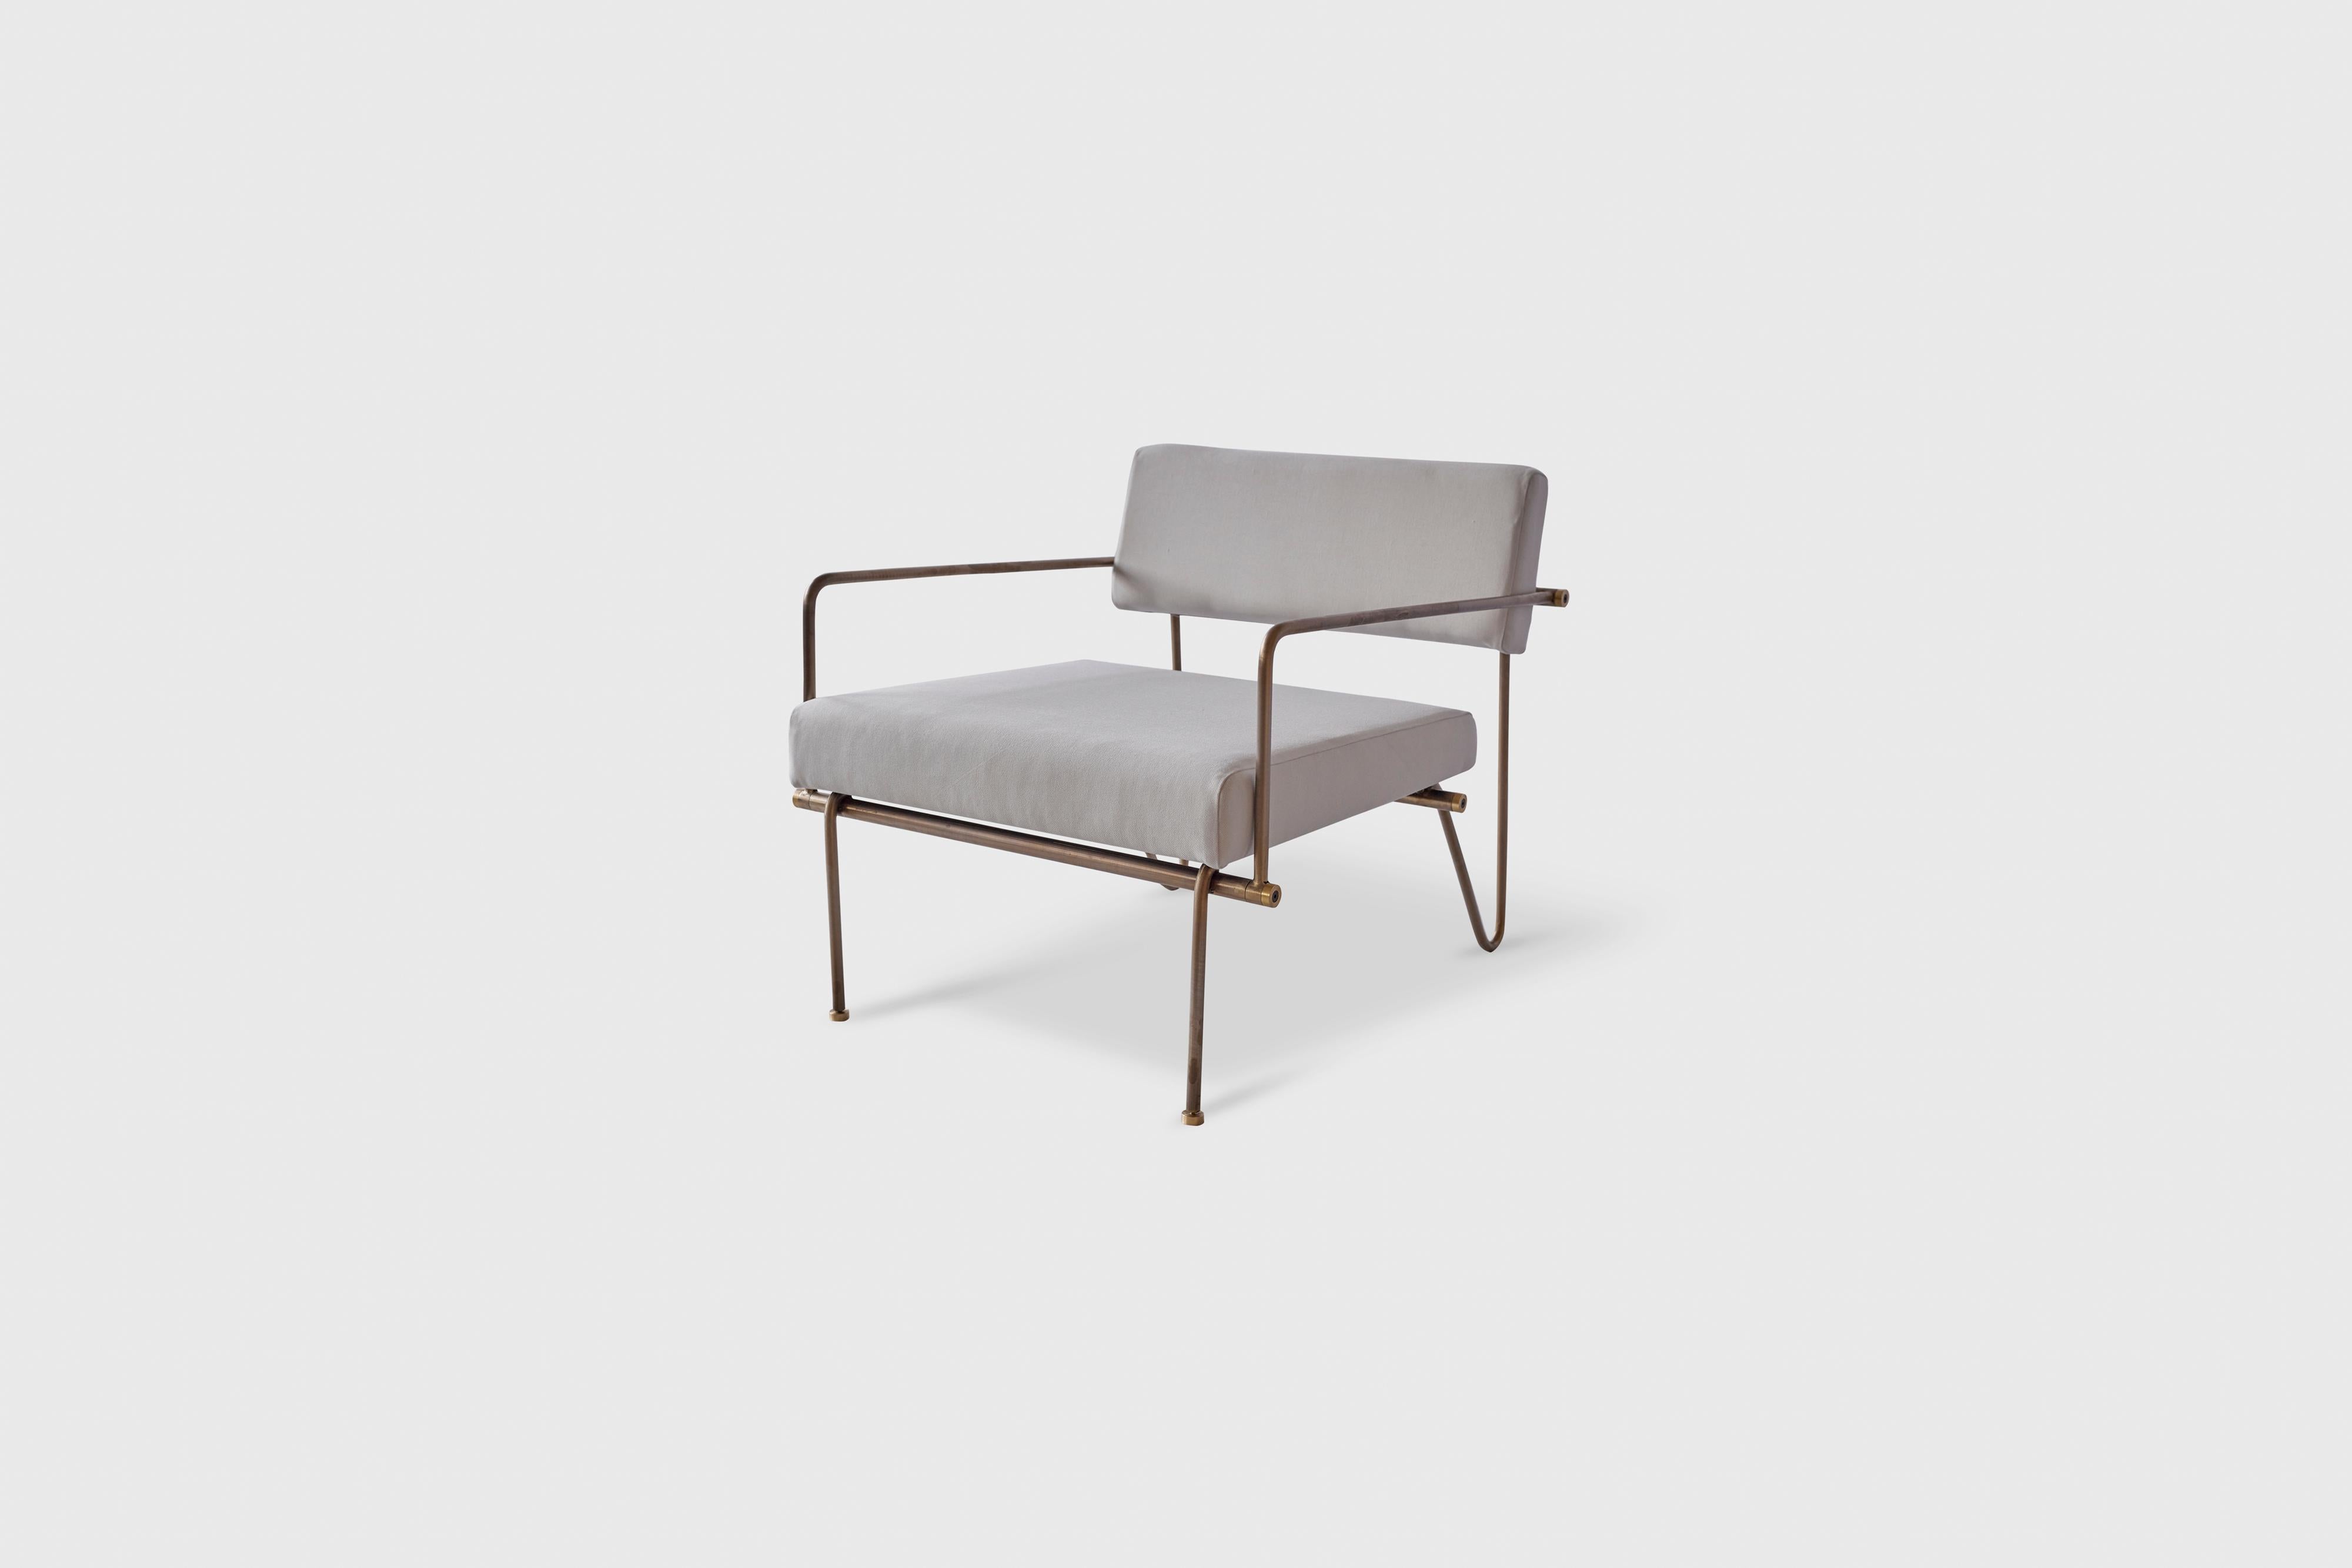 Beachwood loveseat by Atra Design
Dimensions: D 67 x W 67.5 x H 67.8 cm
Materials: steel with golden finish, fabric.
Available in leather and fabric seat.

Atra Design
We are Atra, a furniture brand produced by Atra form a mexico city–based high end